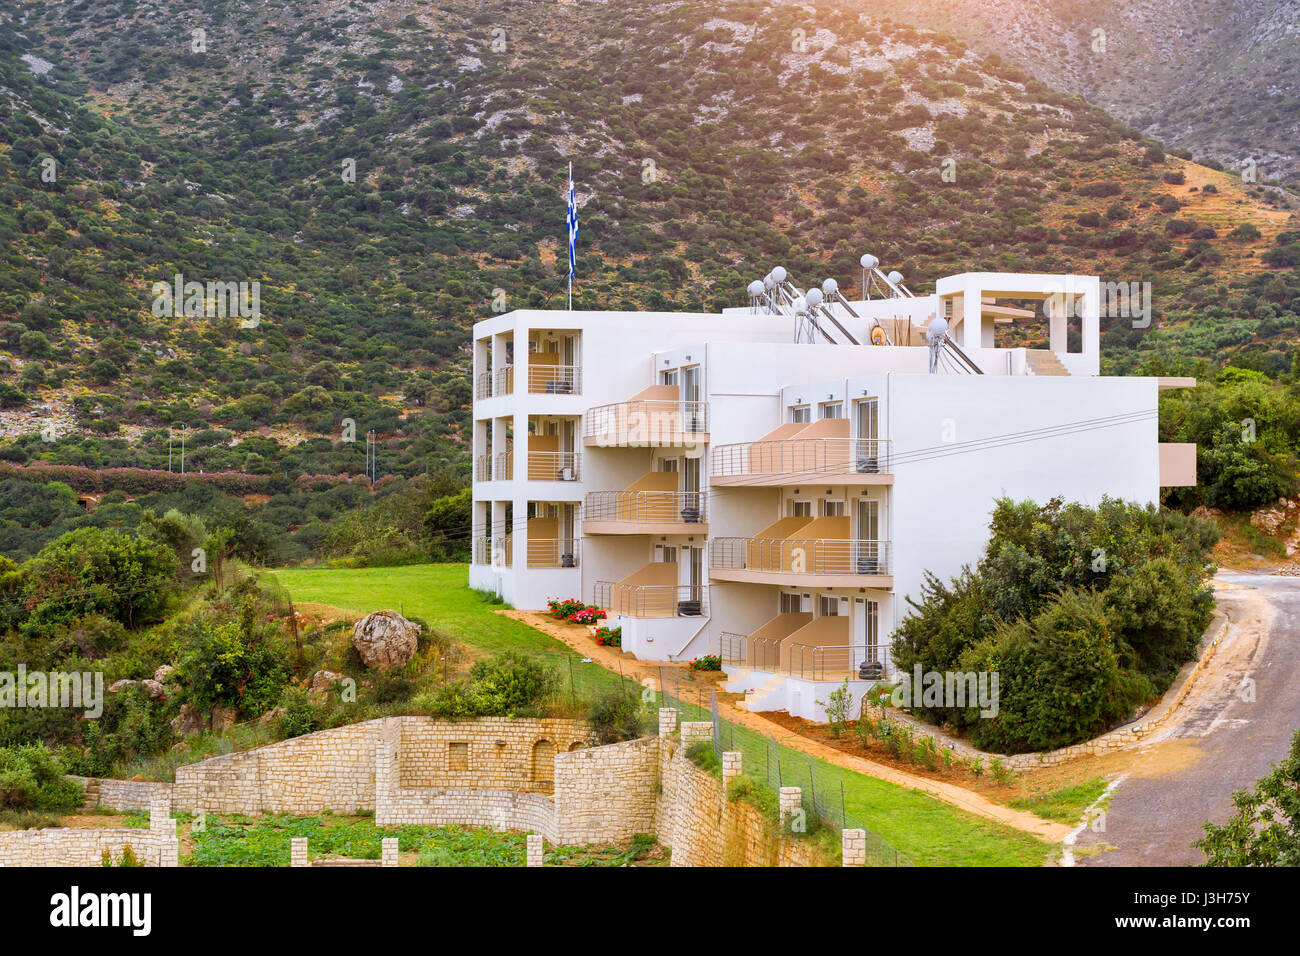 Modern Greek architecture, new white building in constructivist style, stands on shore of Cretan sea. On flagpole flag of Greece. Resort village Bali, Stock Photo